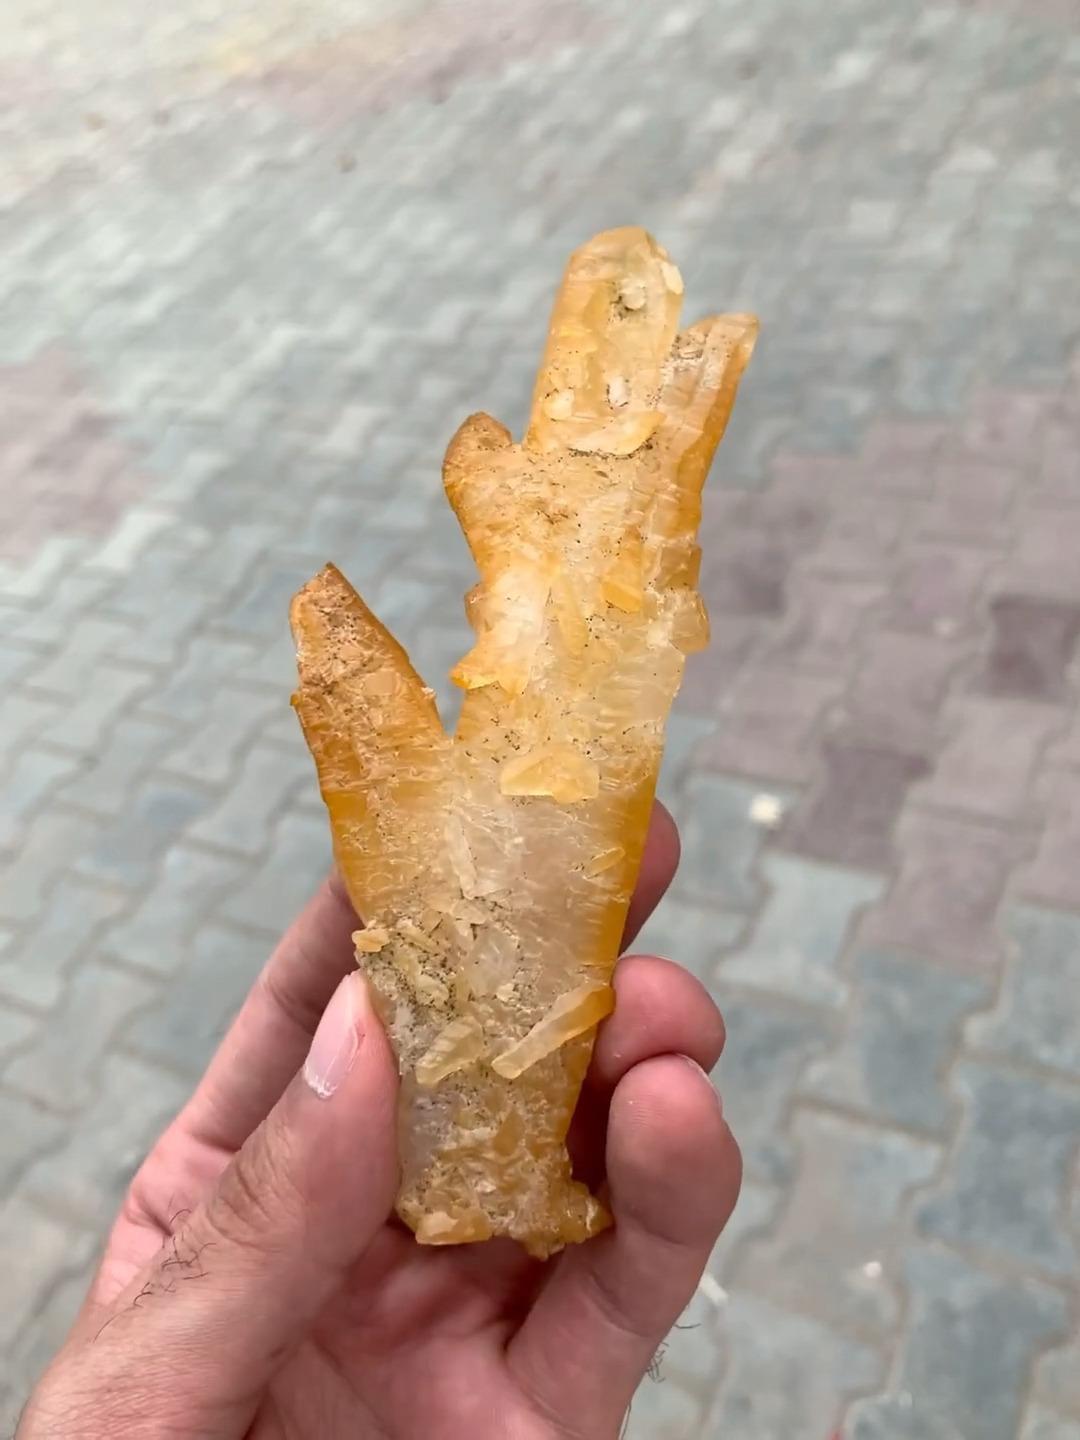 Uncut Sculptural And Impressive Elongated Iron Coated Quartz Crystals From Pakistan For Sale